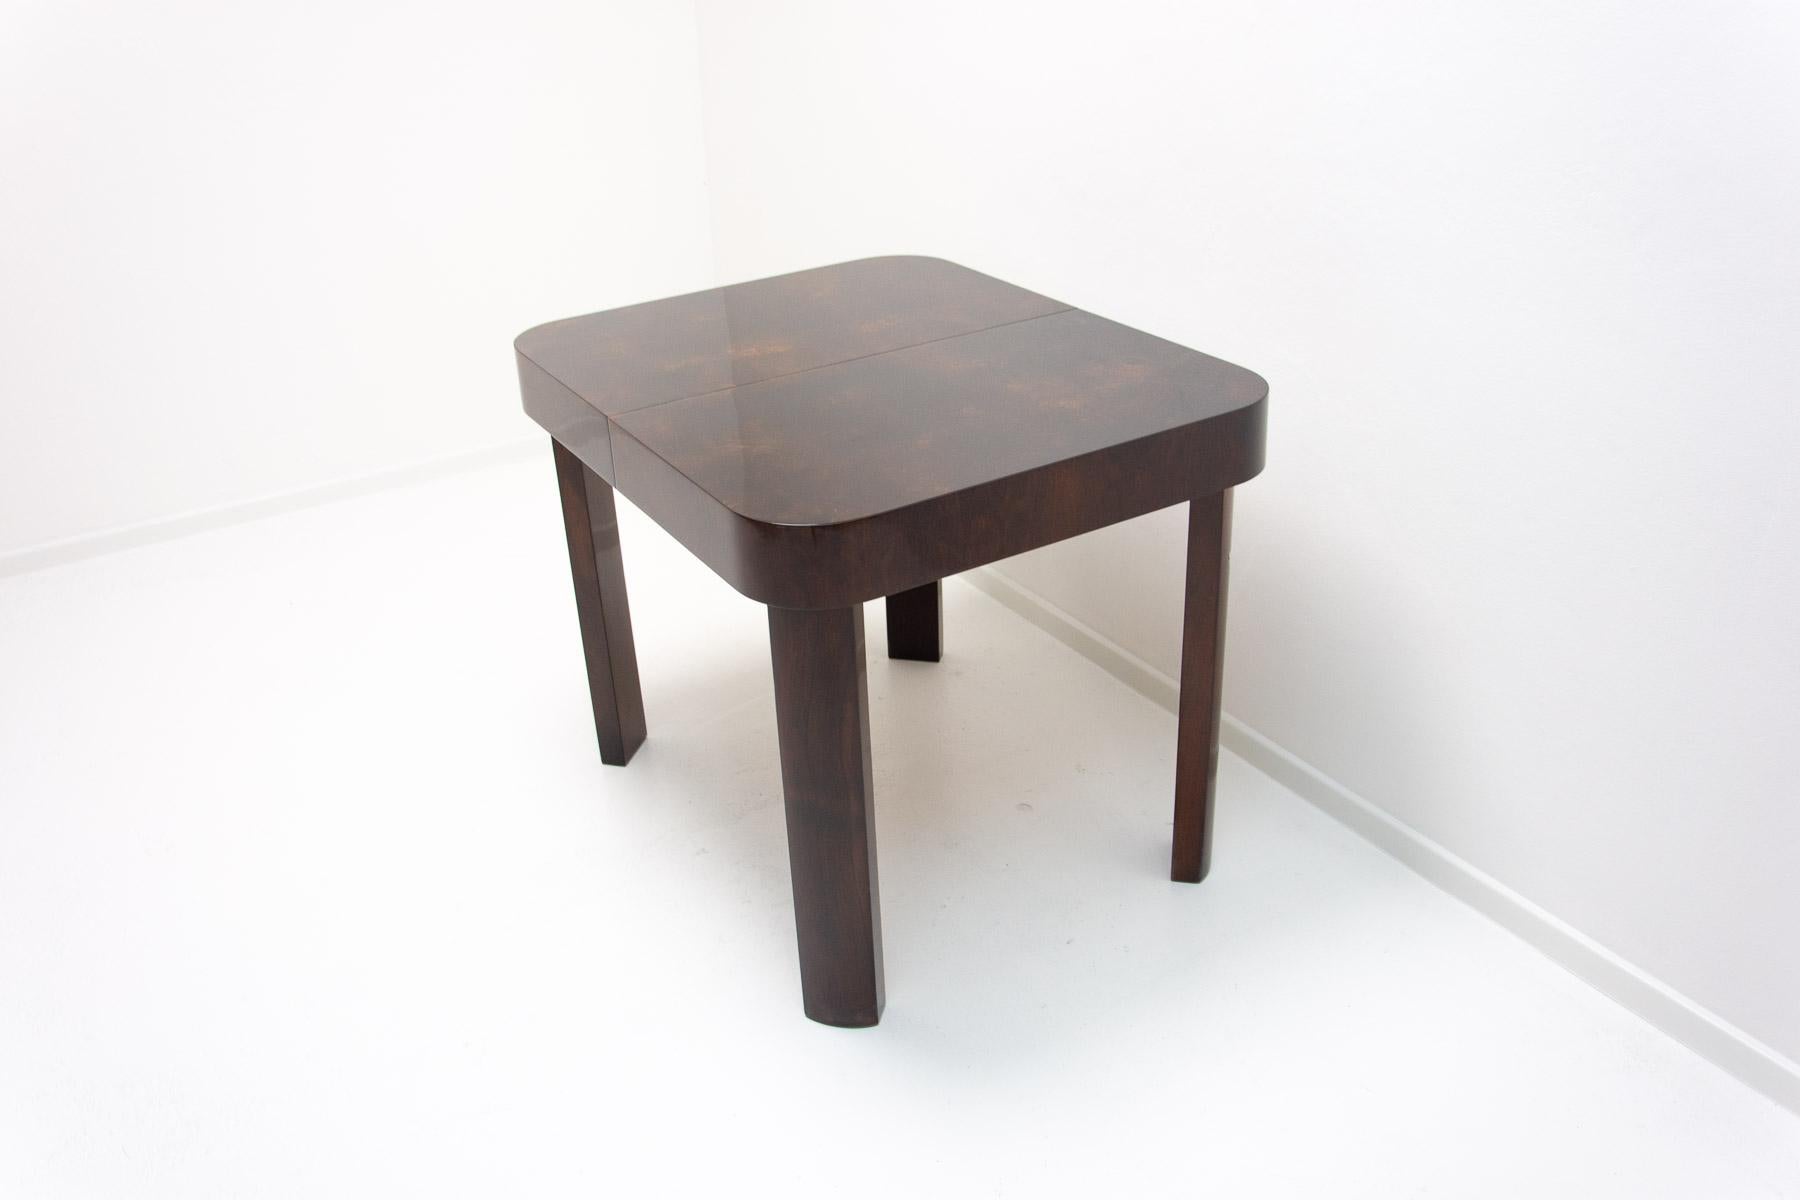 Czech  Midcentury Fully renovated adjustable walnut dining table by Jindrich Halabala.